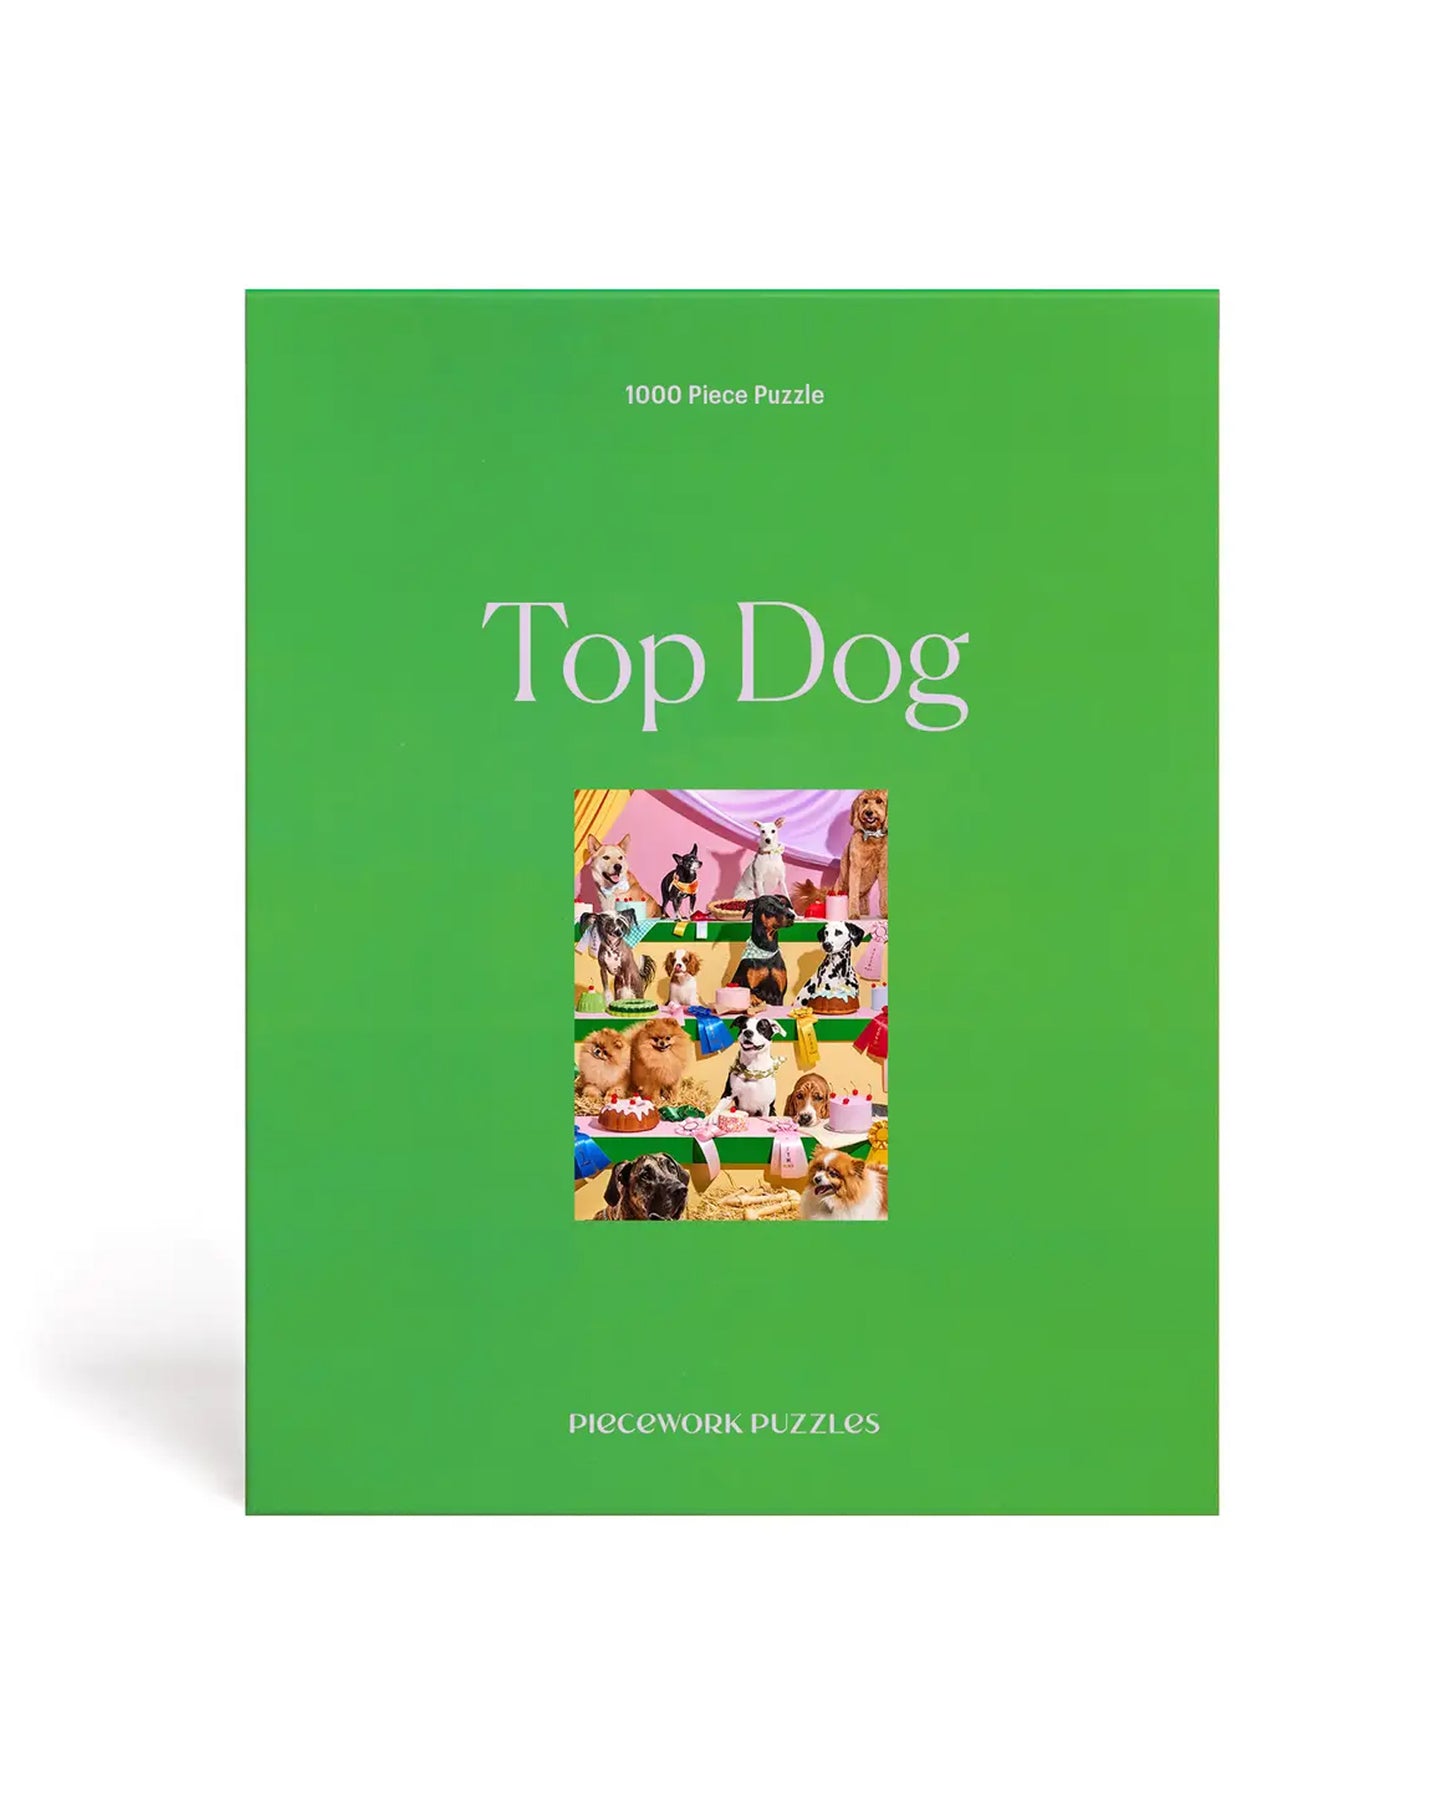 PIECEWORK 1000 Piece Puzzle in Top Dog available at Lahn.shop